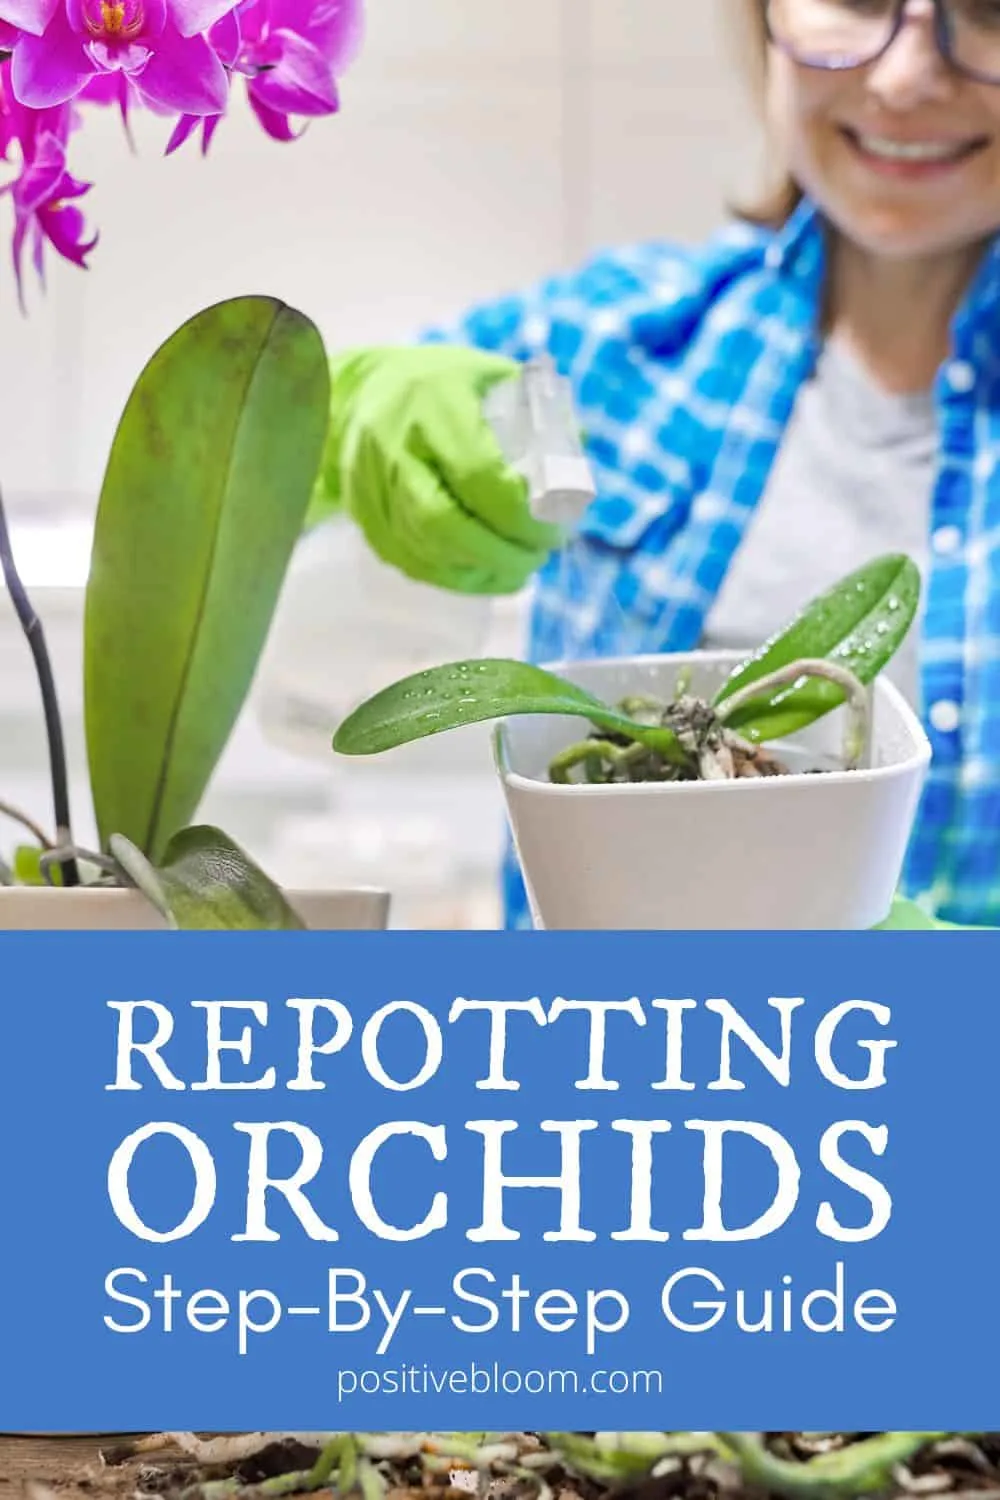 Step-By-Step Guide To Repotting Orchids (Best Tips)